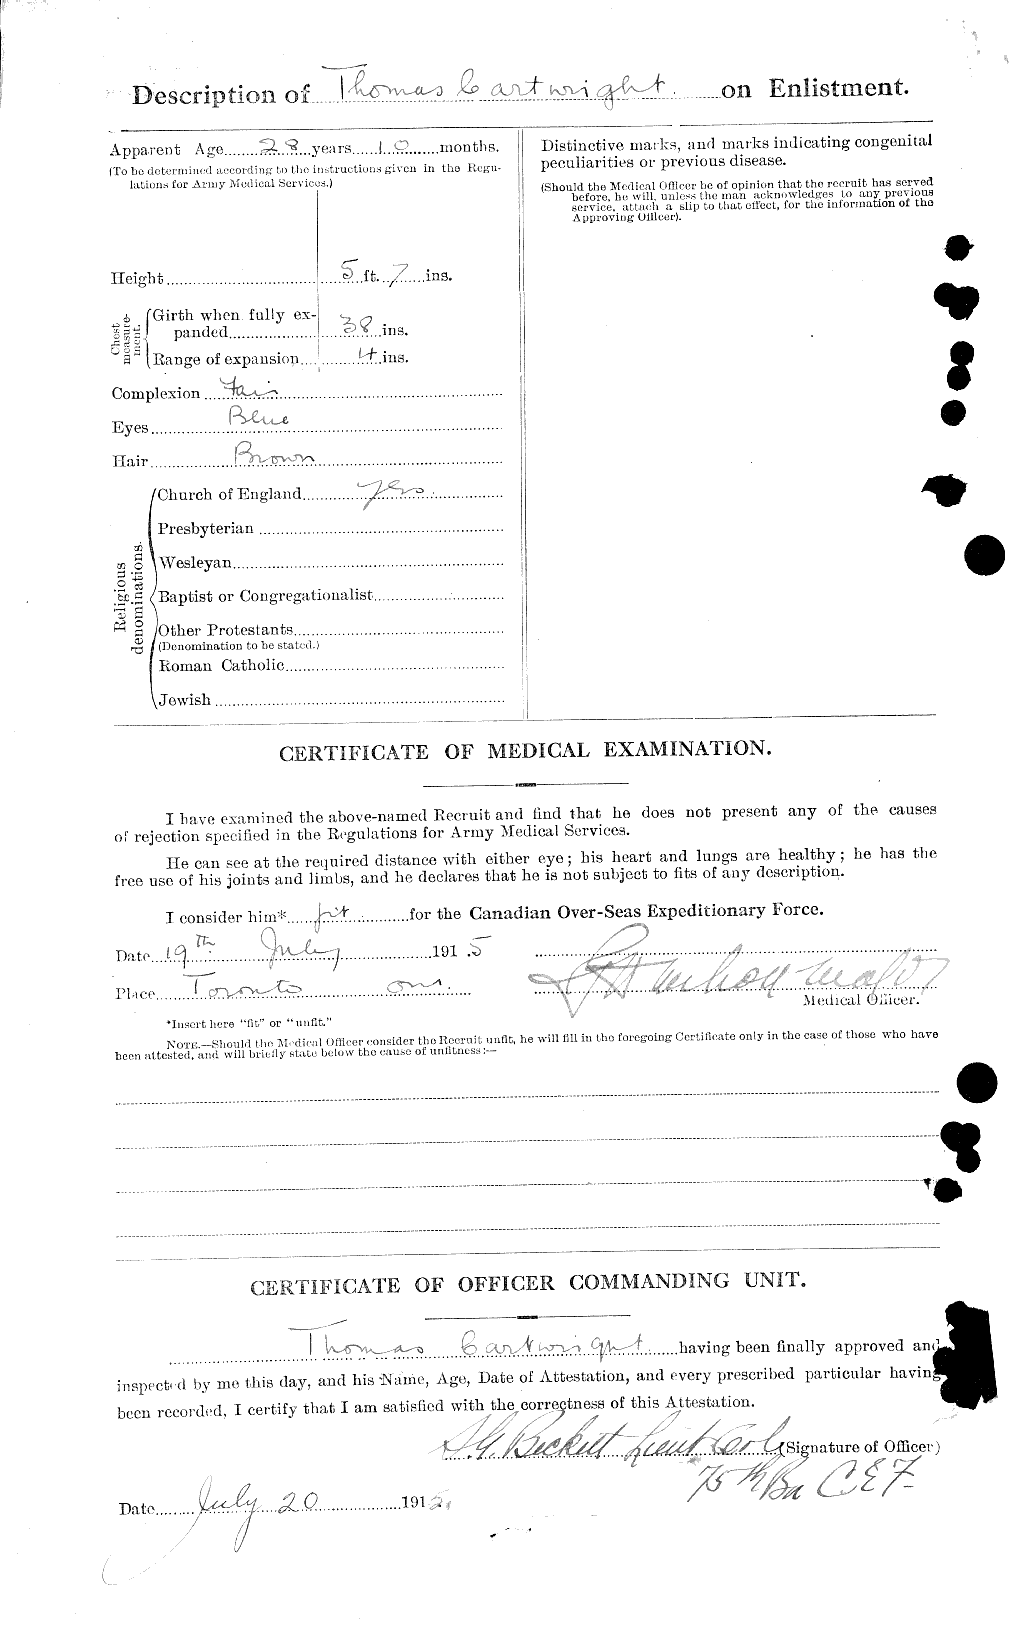 Personnel Records of the First World War - CEF 011625b